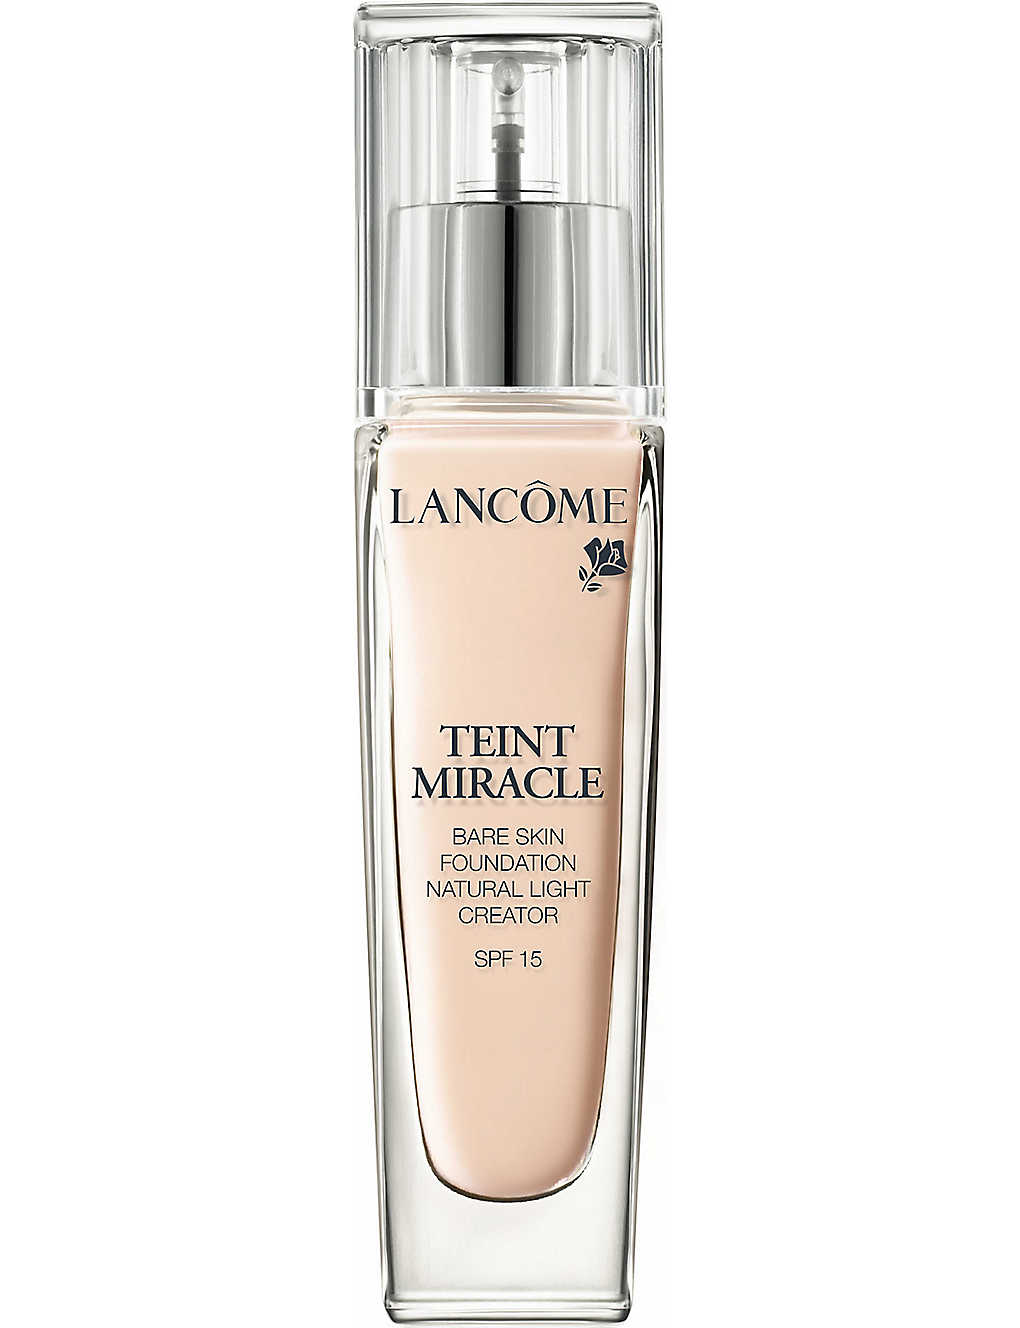 Lancôme Lancome 5 Teint Miracle Bare Skin Perfection Foundation Spf 15 In 005